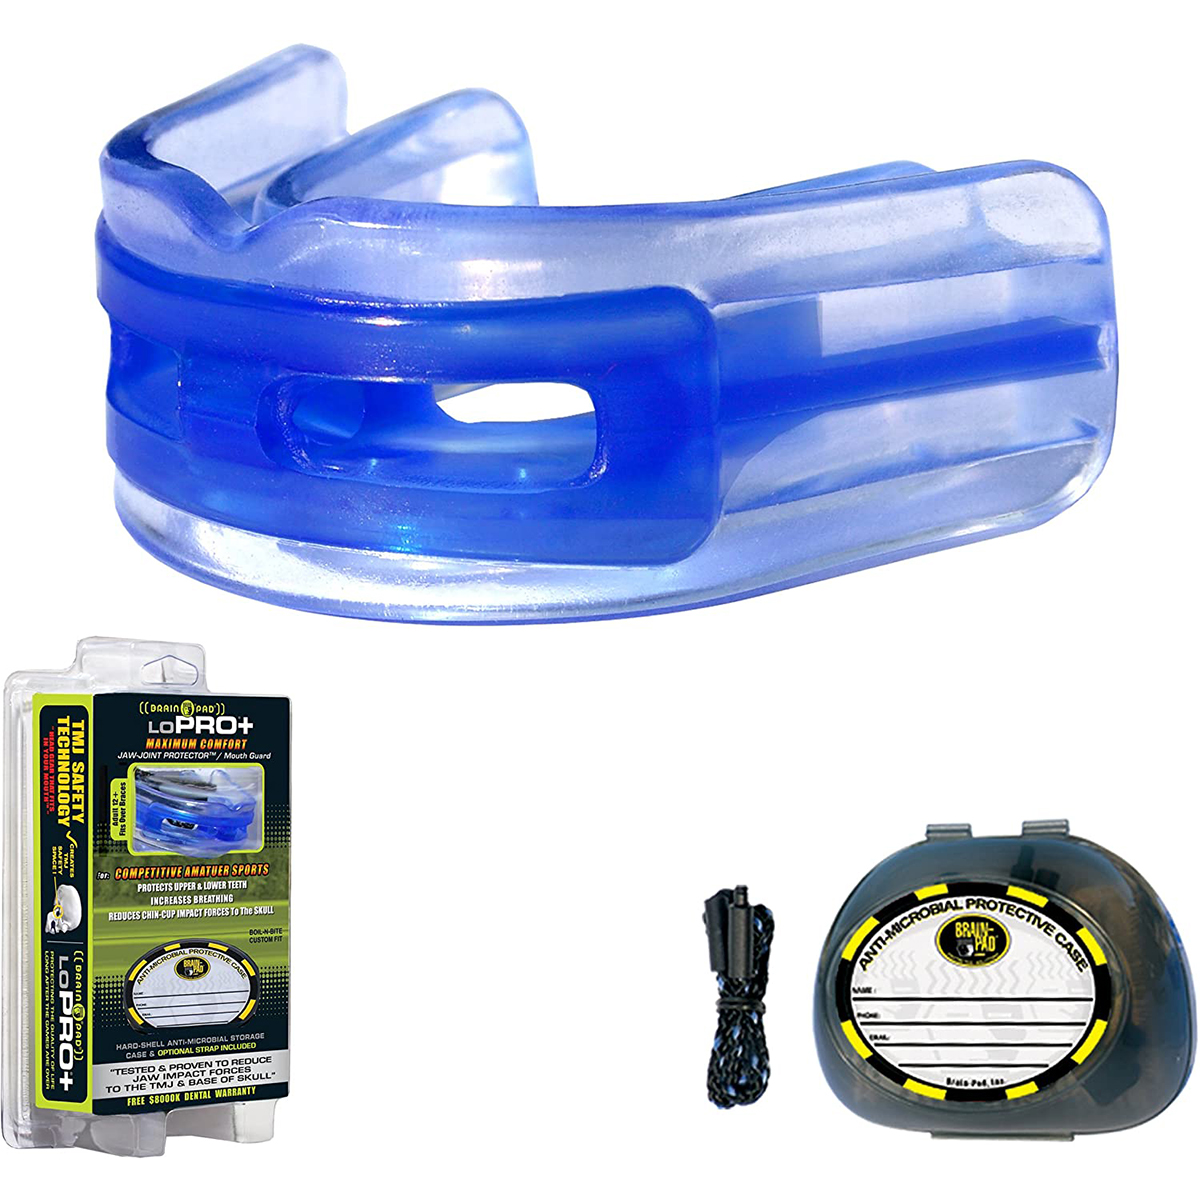 Brain Pad LoPro+ Mouthguard - Adult - Blue - image 3 of 3